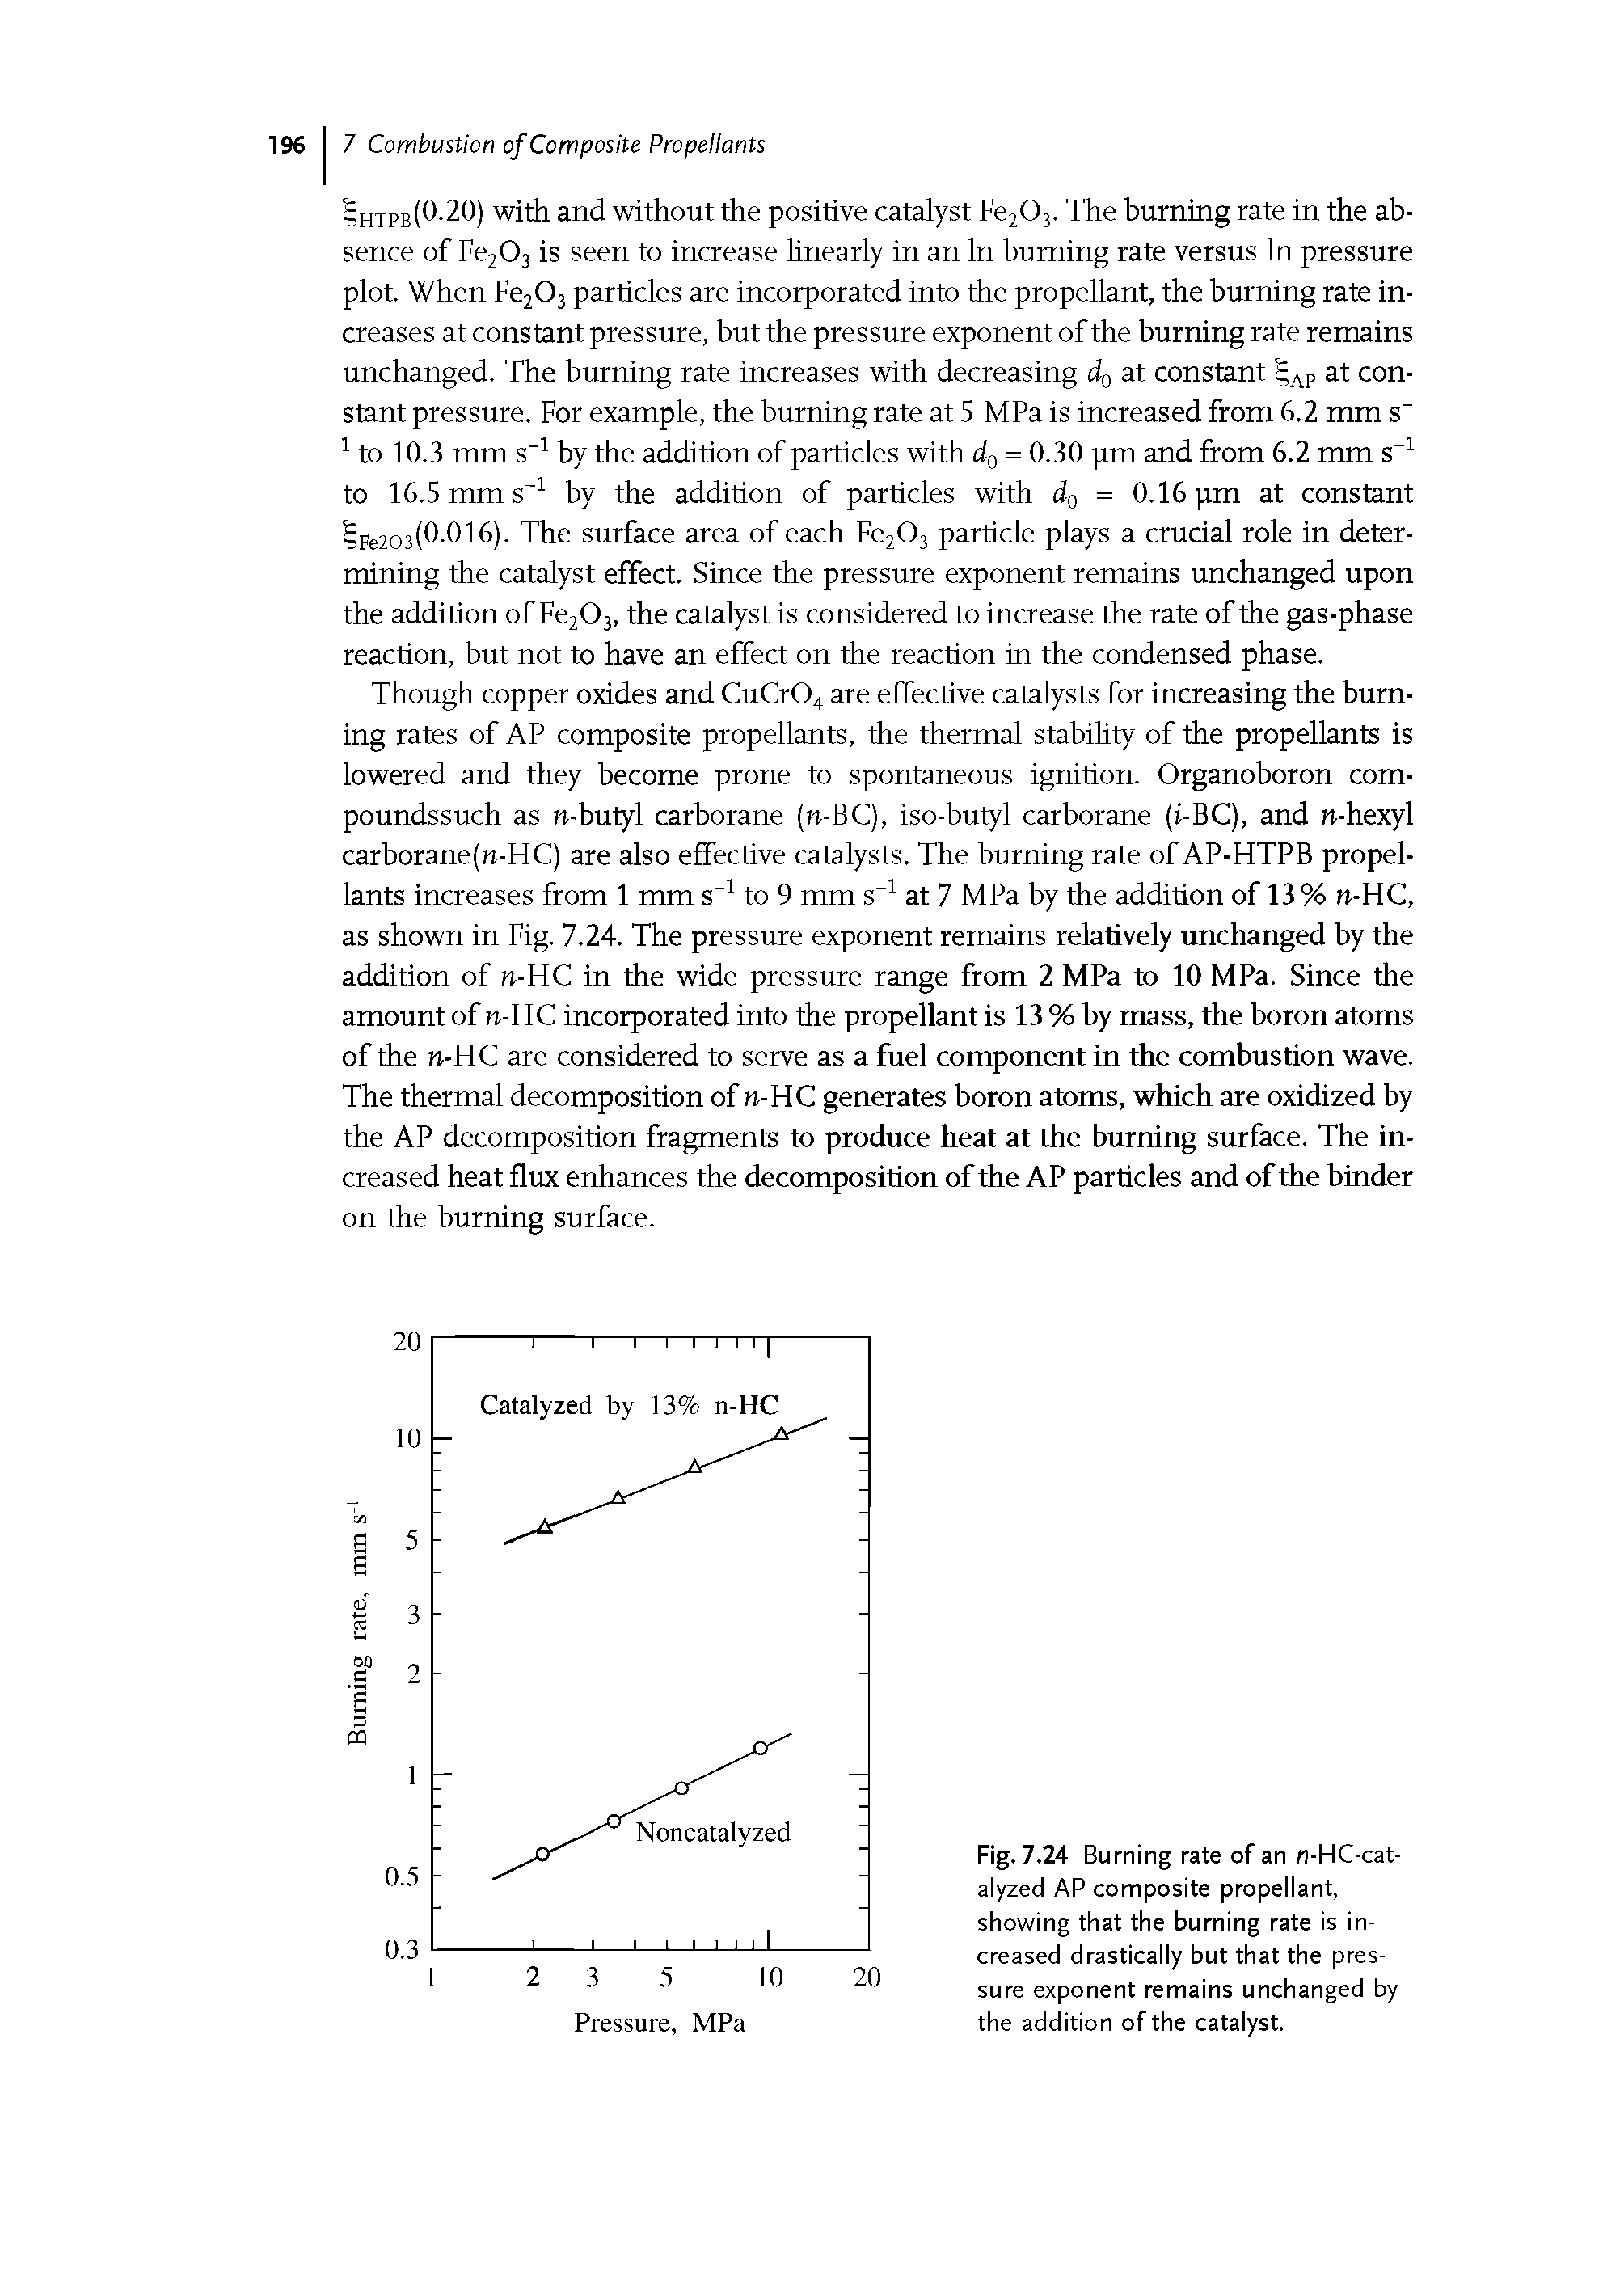 Fig. 7.24 Burning rate of an n-HC-cat-alyzed AP composite propellant, showing that the burning rate is increased drastically but that the pressure exponent remains unchanged by the addition of the catalyst.